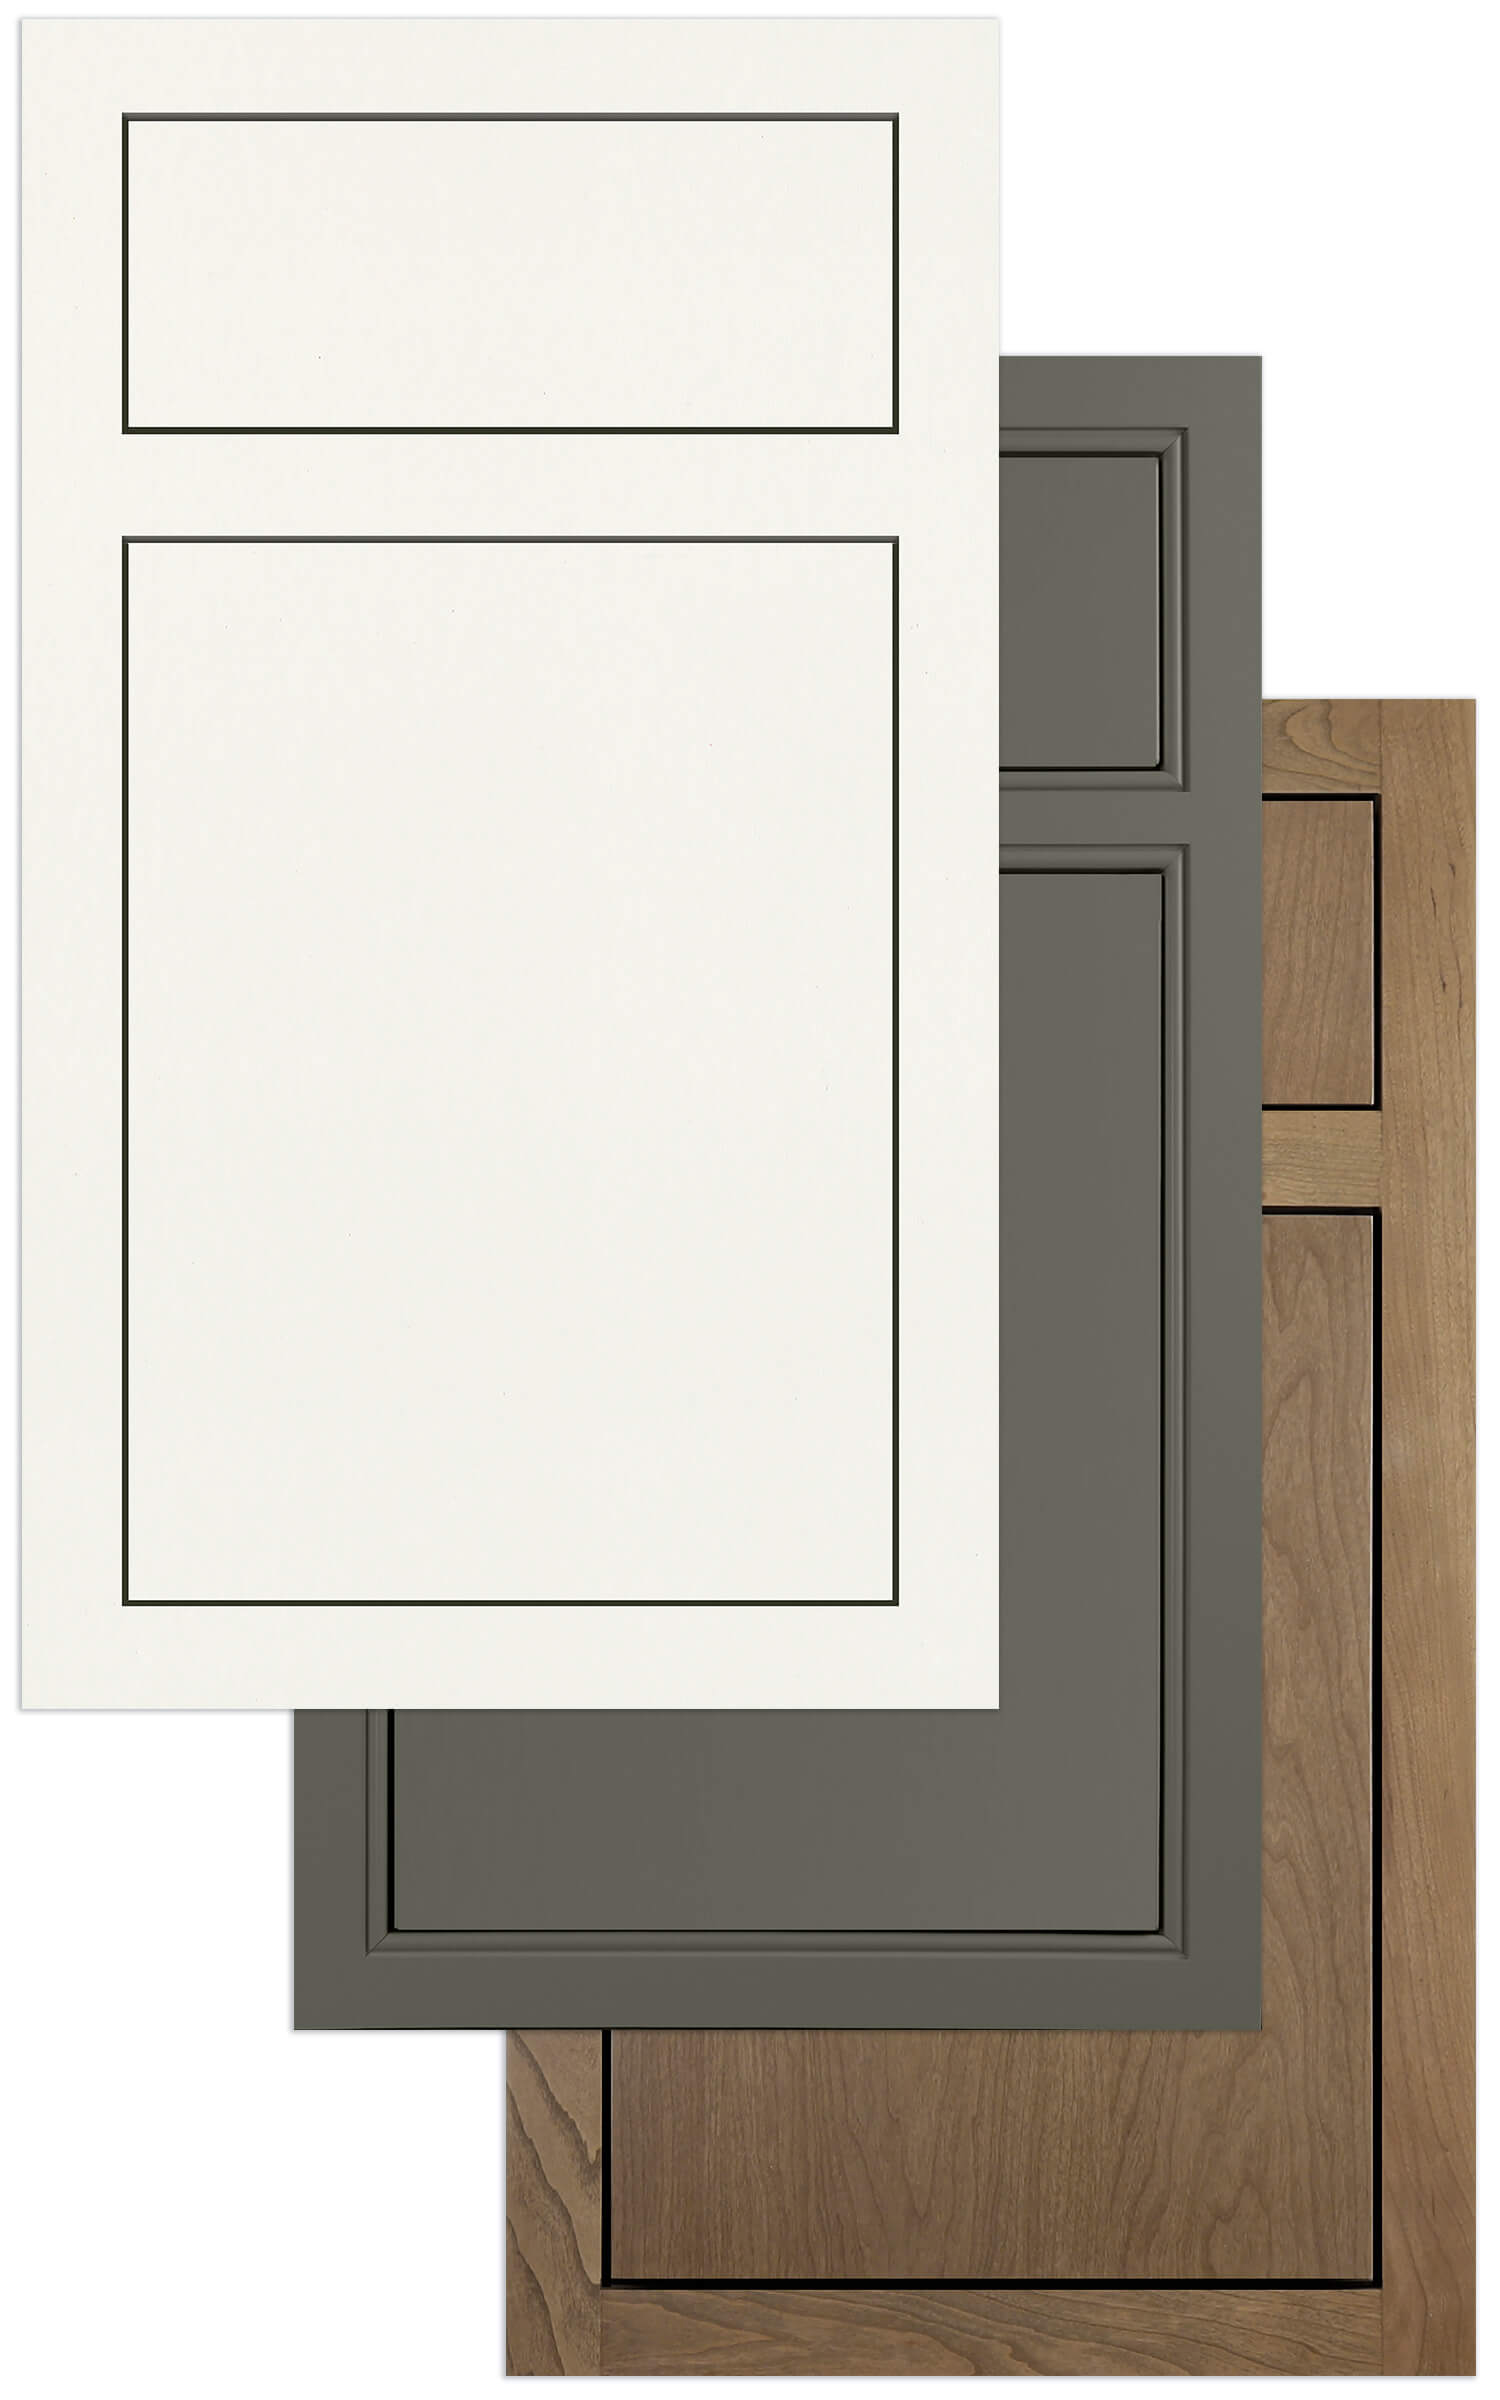 Three examples of slab inset cabinet doors in both paint and wood stained finishes.